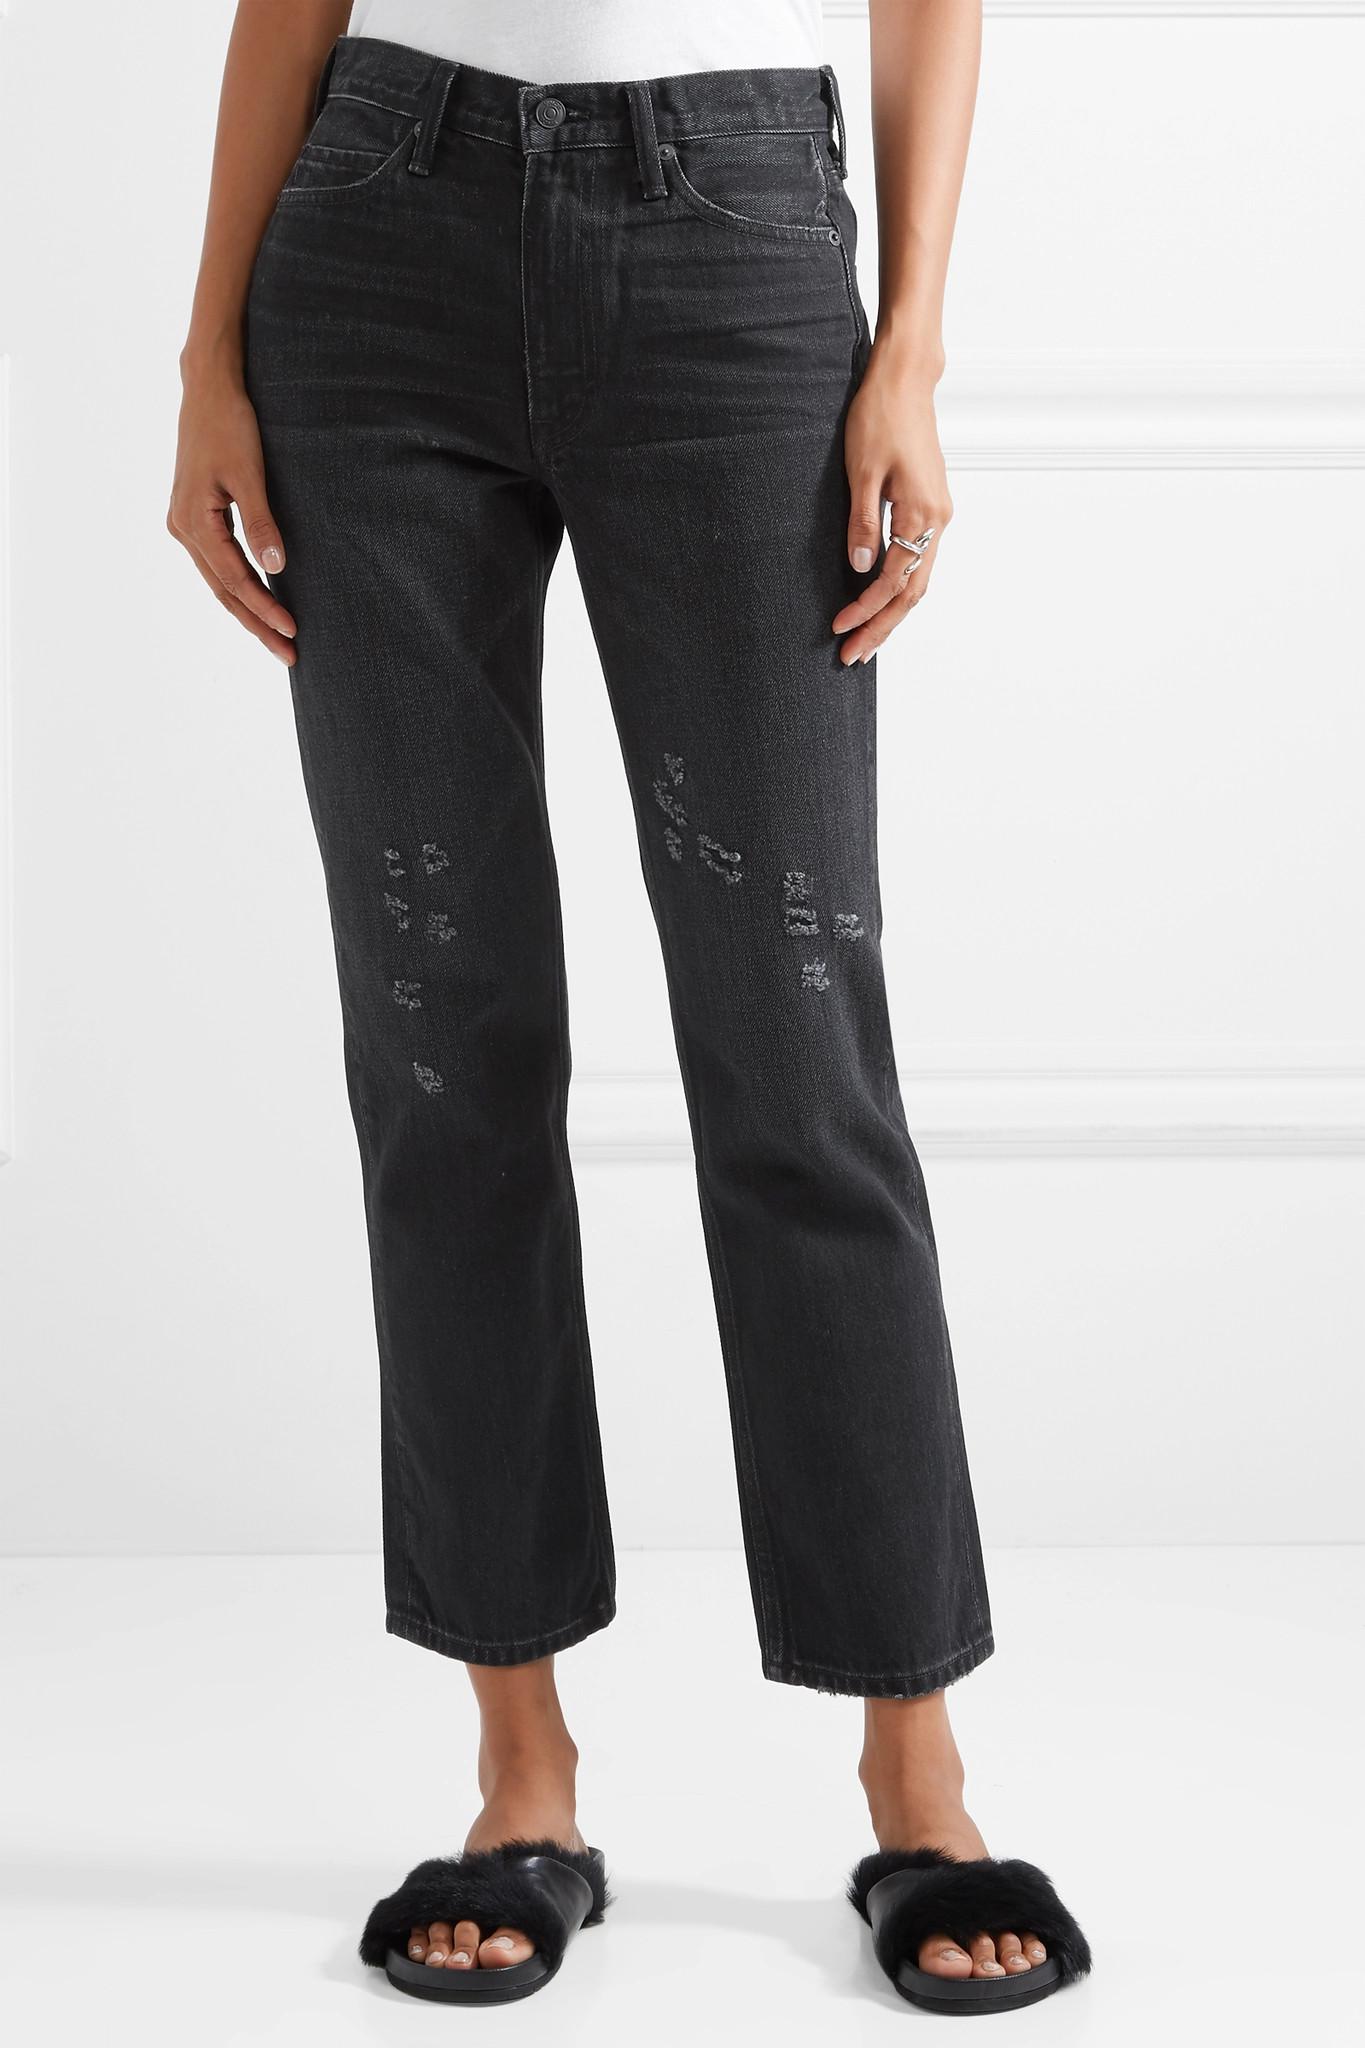 Lyst - Vince Distressed High-rise Straight-leg Jeans in Black